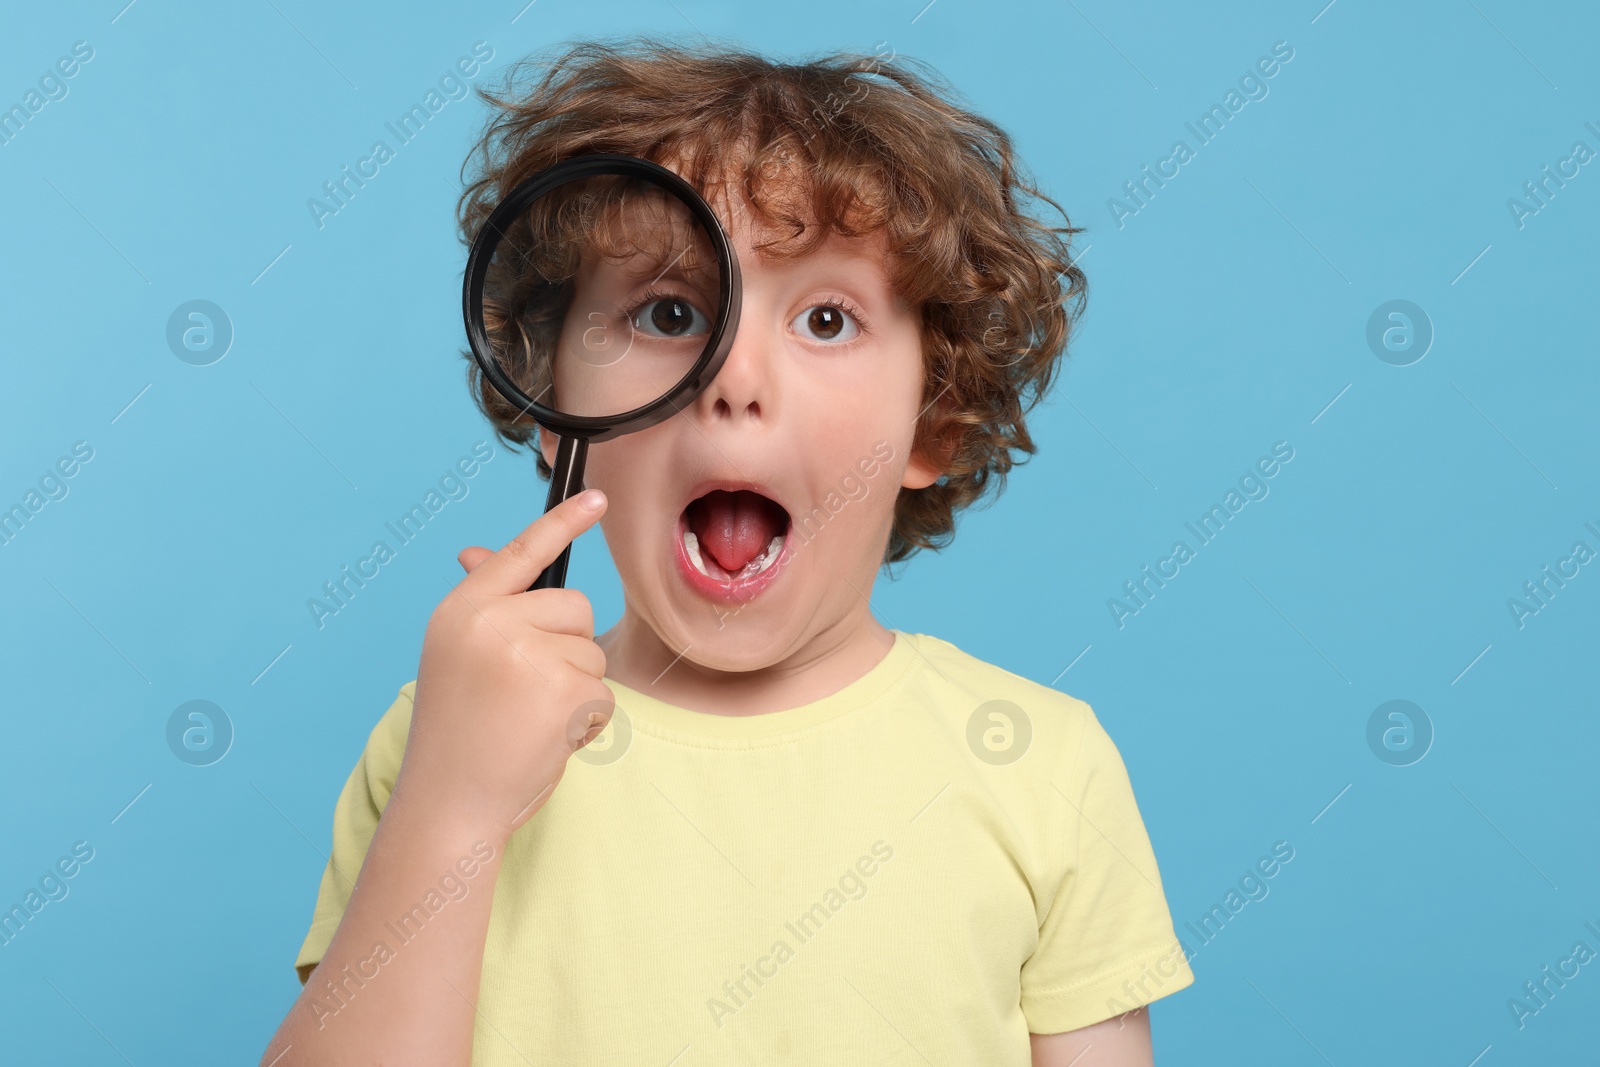 Photo of Cute little boy looking through magnifier glass on light blue background